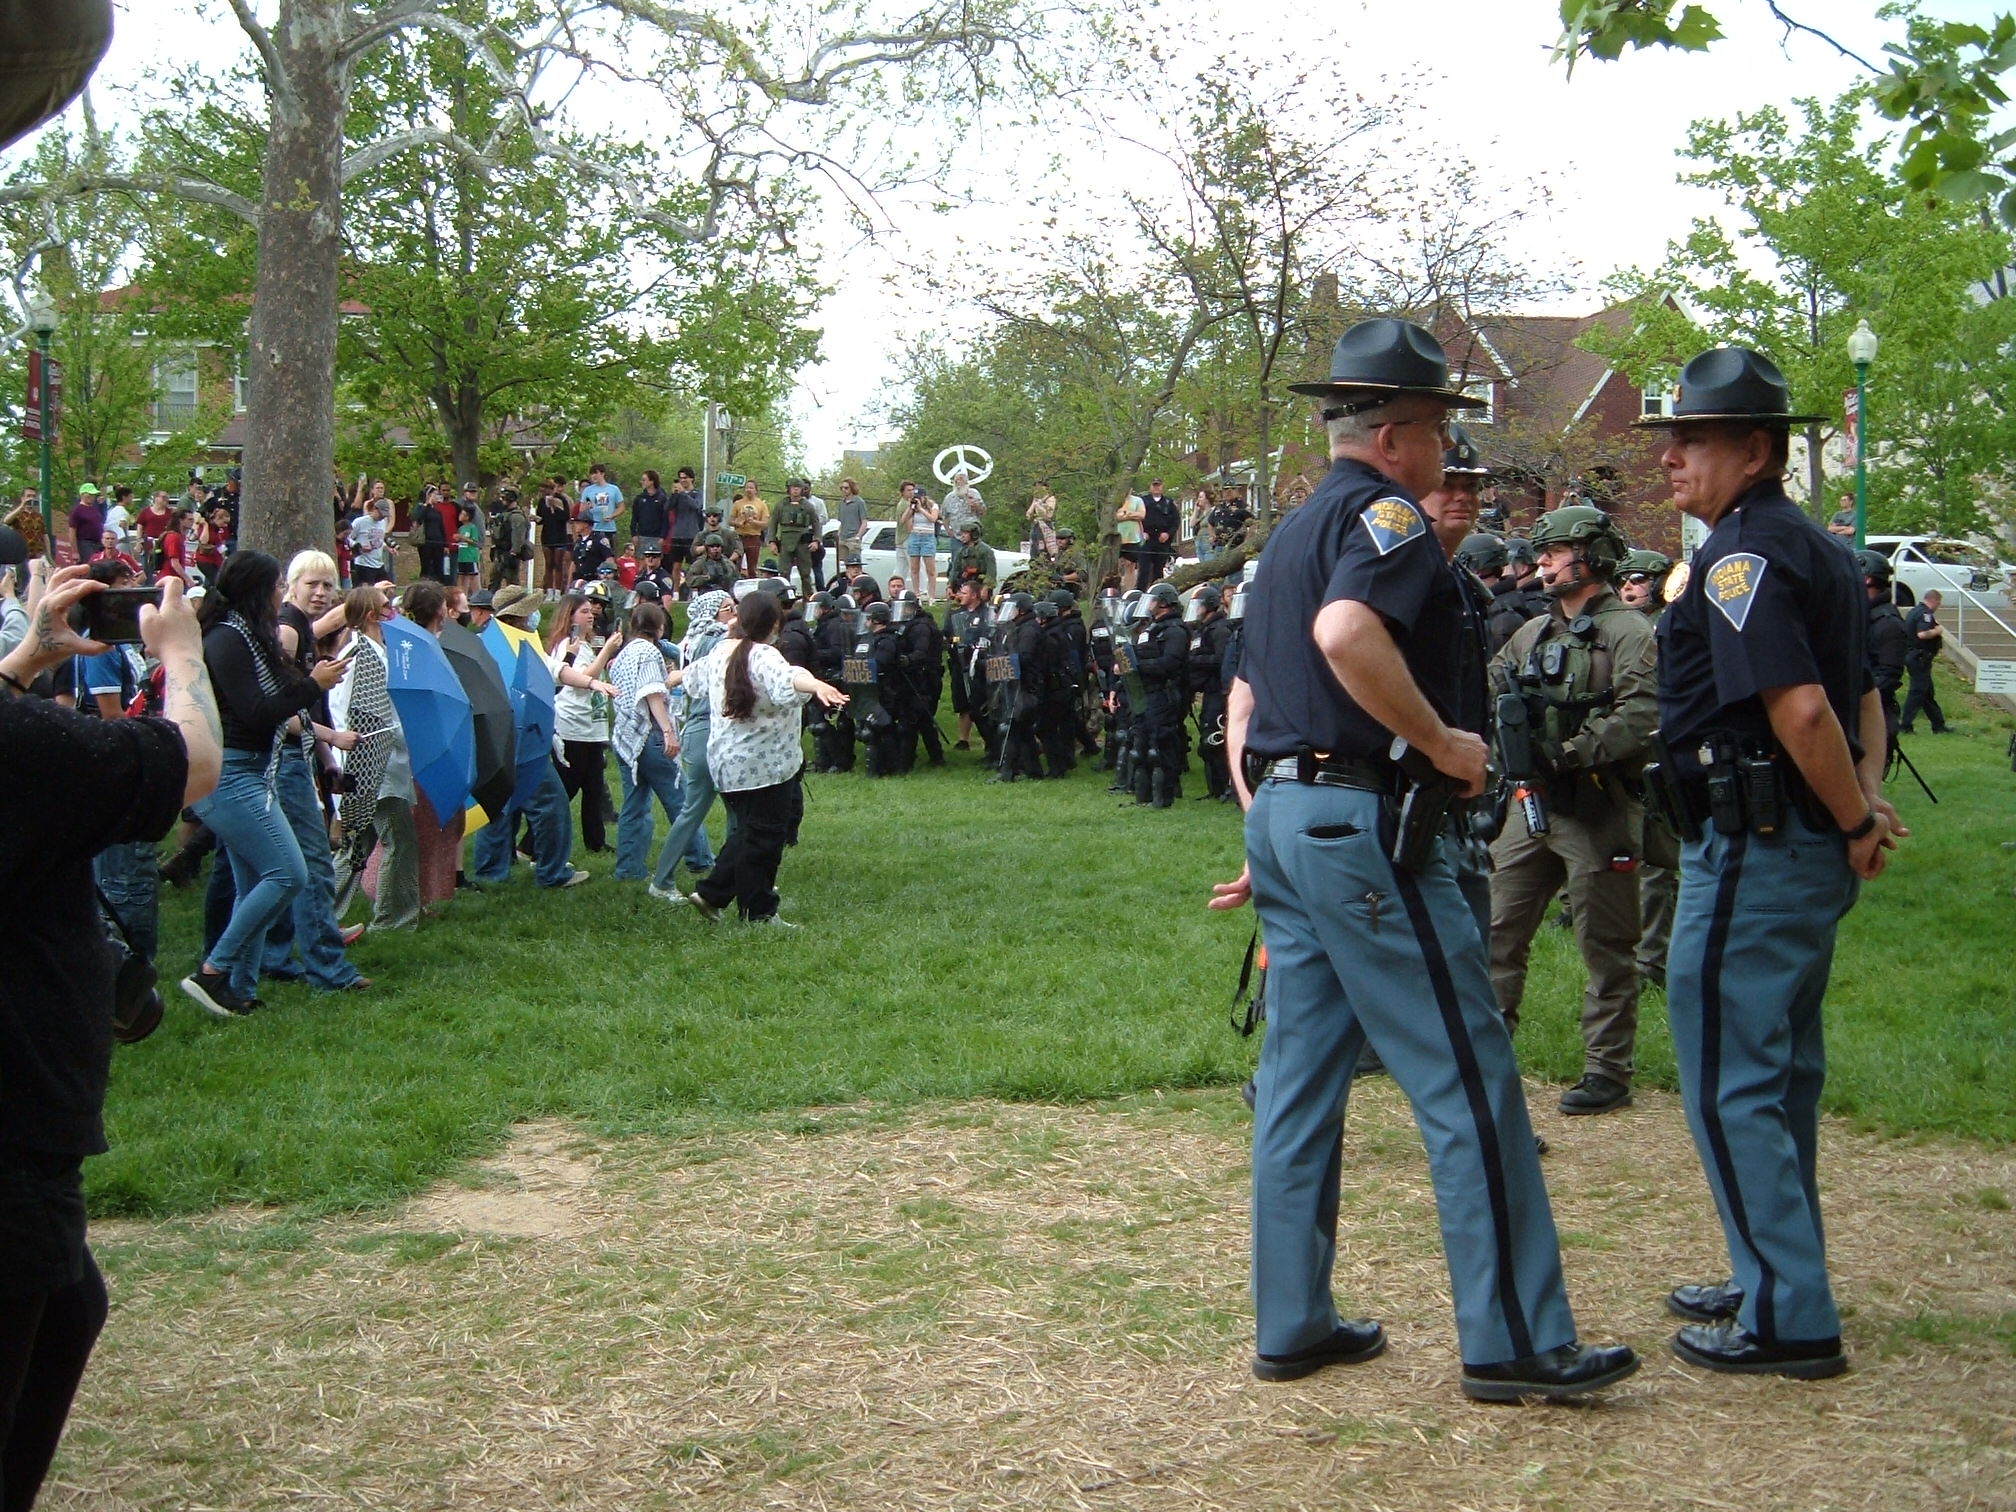 Protestors form a line facing police as they retreat from Dunn Meadow. The commanding officers converse in the foreground as they guide their units away from the scene.